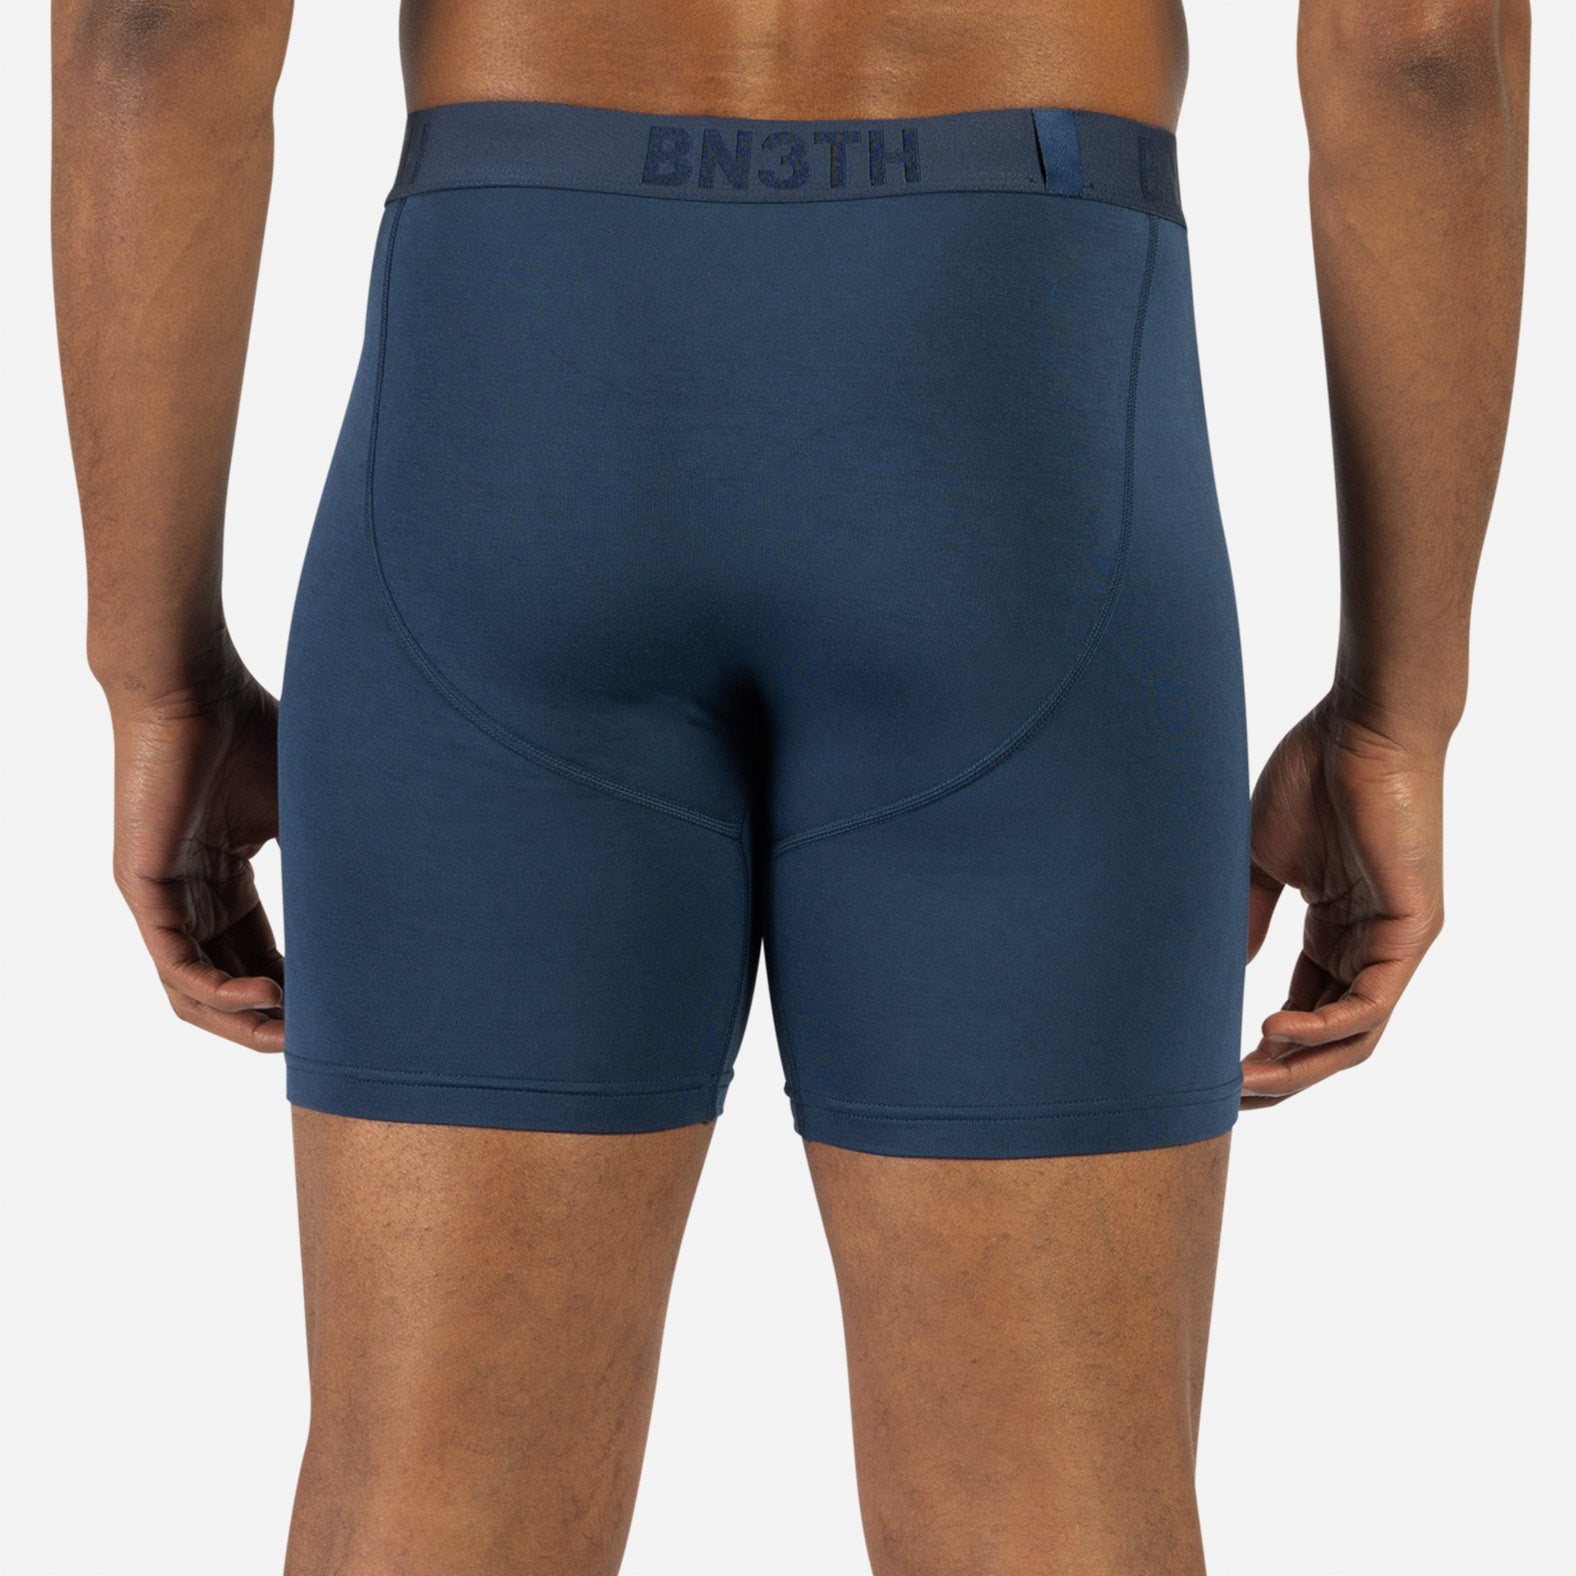 CLASSIC BOXER BRIEF: BLACK/NAVY/PINE/COVERT CAMO 4 PACK